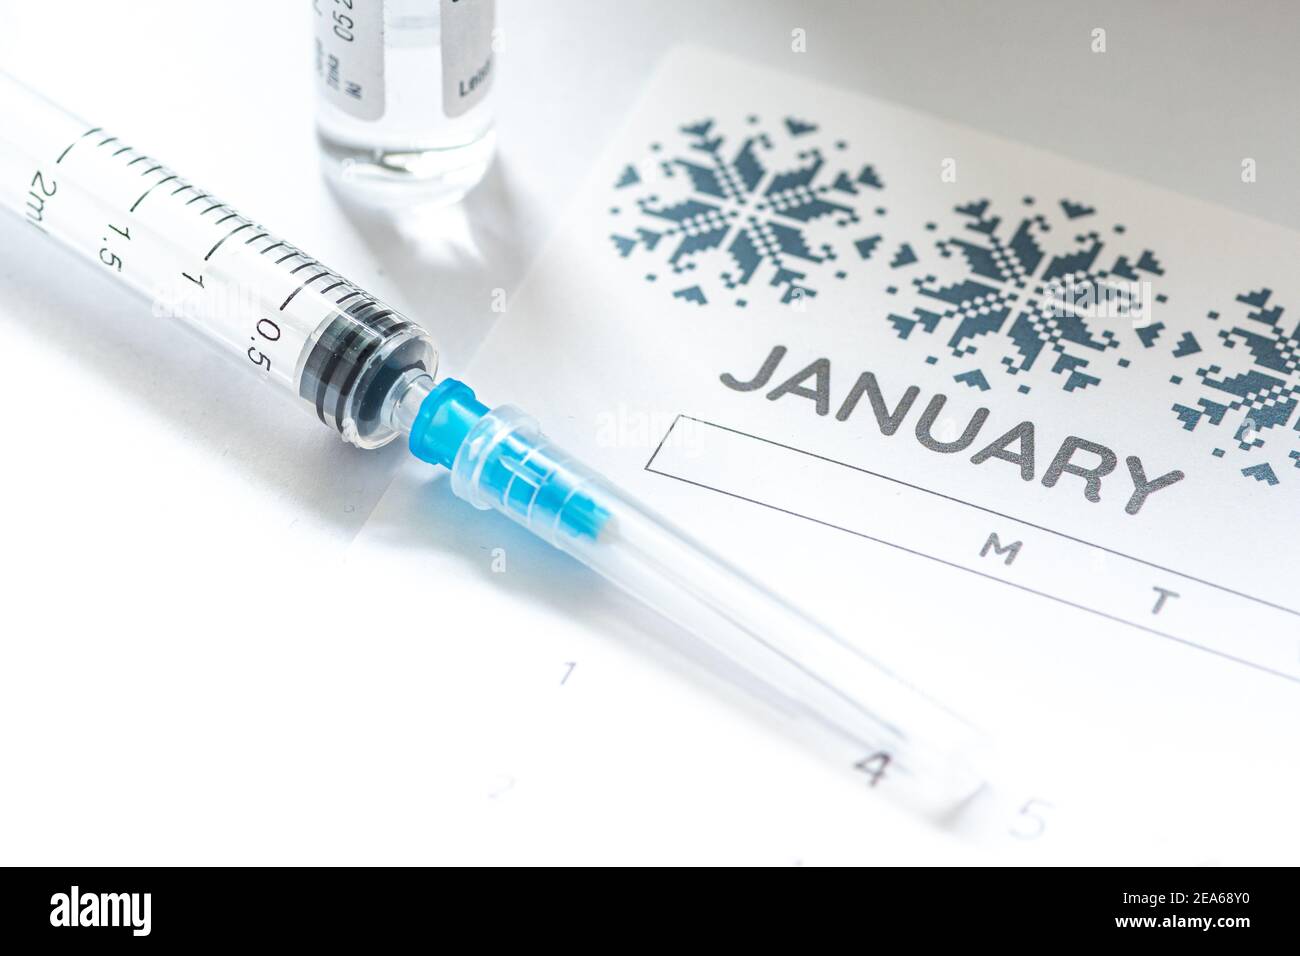 Syringe, glass vial or phial and calendar with month of January on a white table ready to be used. Covid or Coronavirus vaccine background, close up Stock Photo